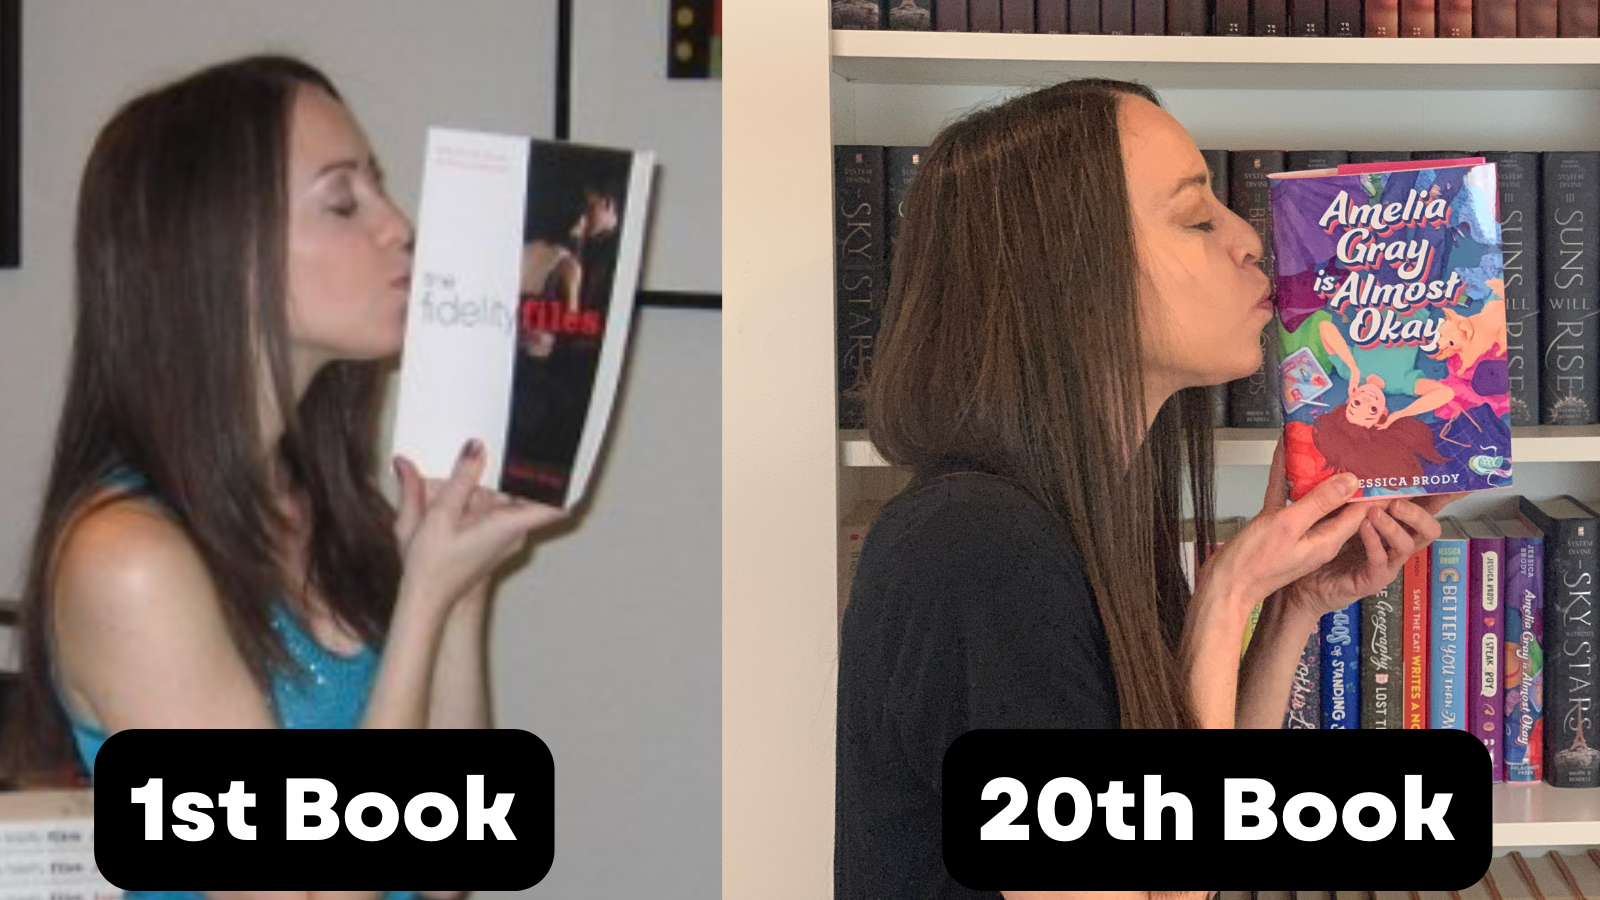 Jessica Brody kisses her first book -- and her 20th book